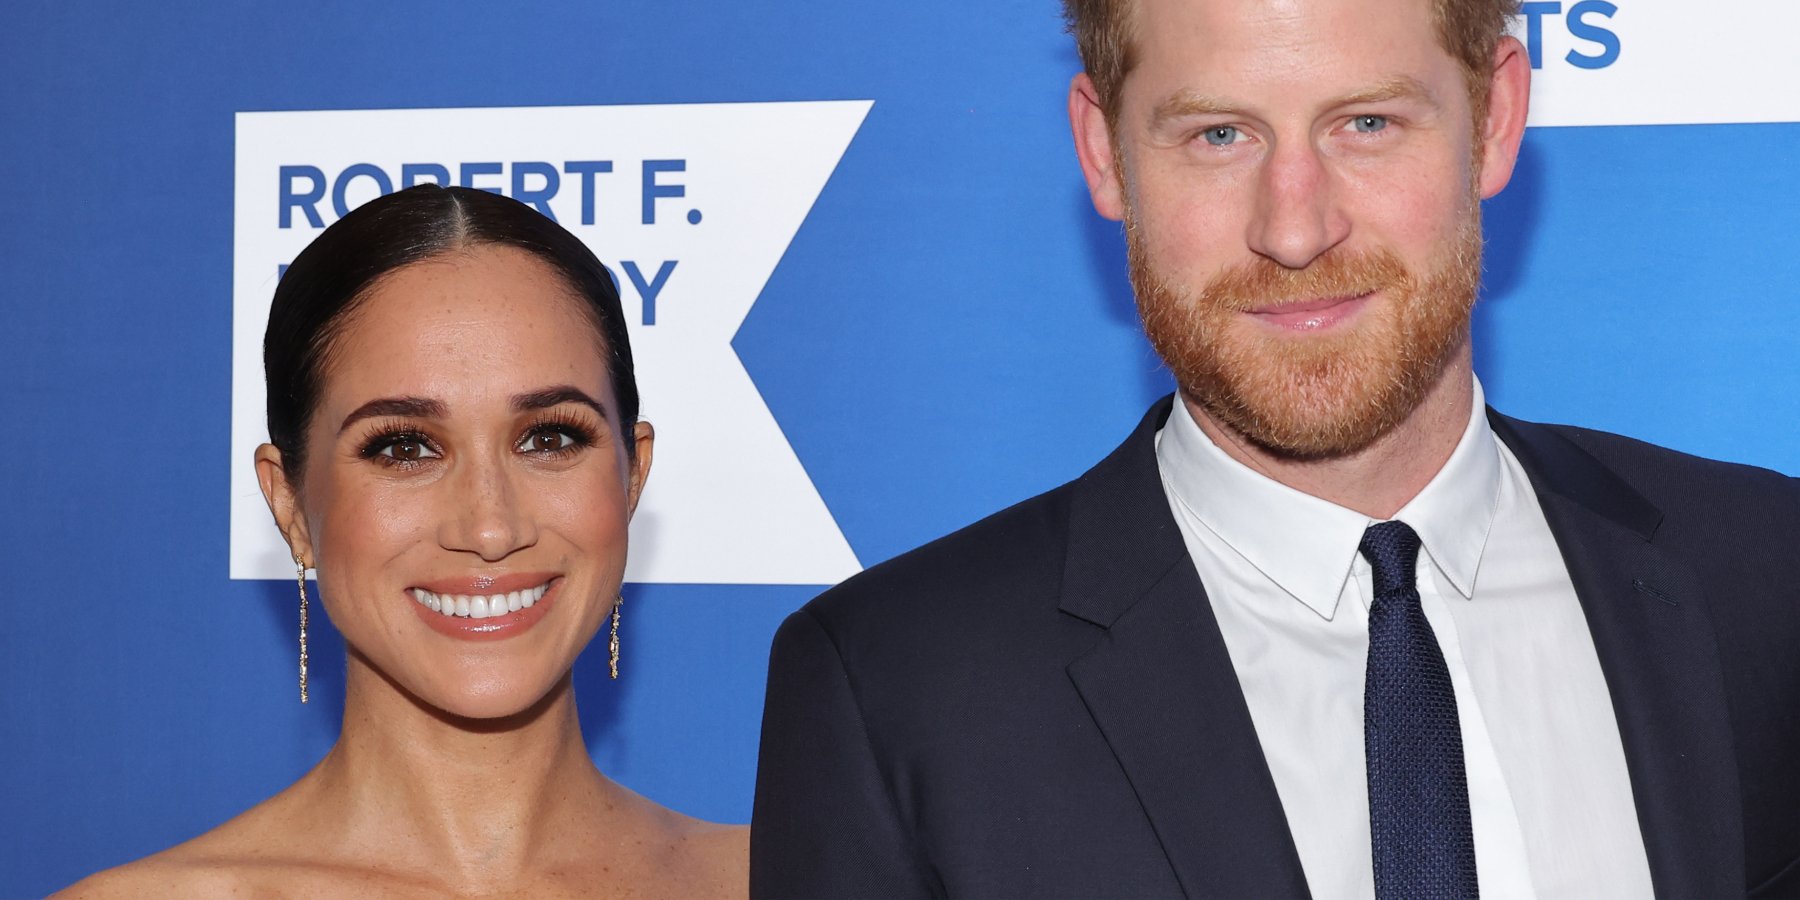 Body Language Expert Says Prince Harry and Meghan Markle Show Signs of ‘Unity, Excitement and Unadulterated Pleasure’ During New York Night Out